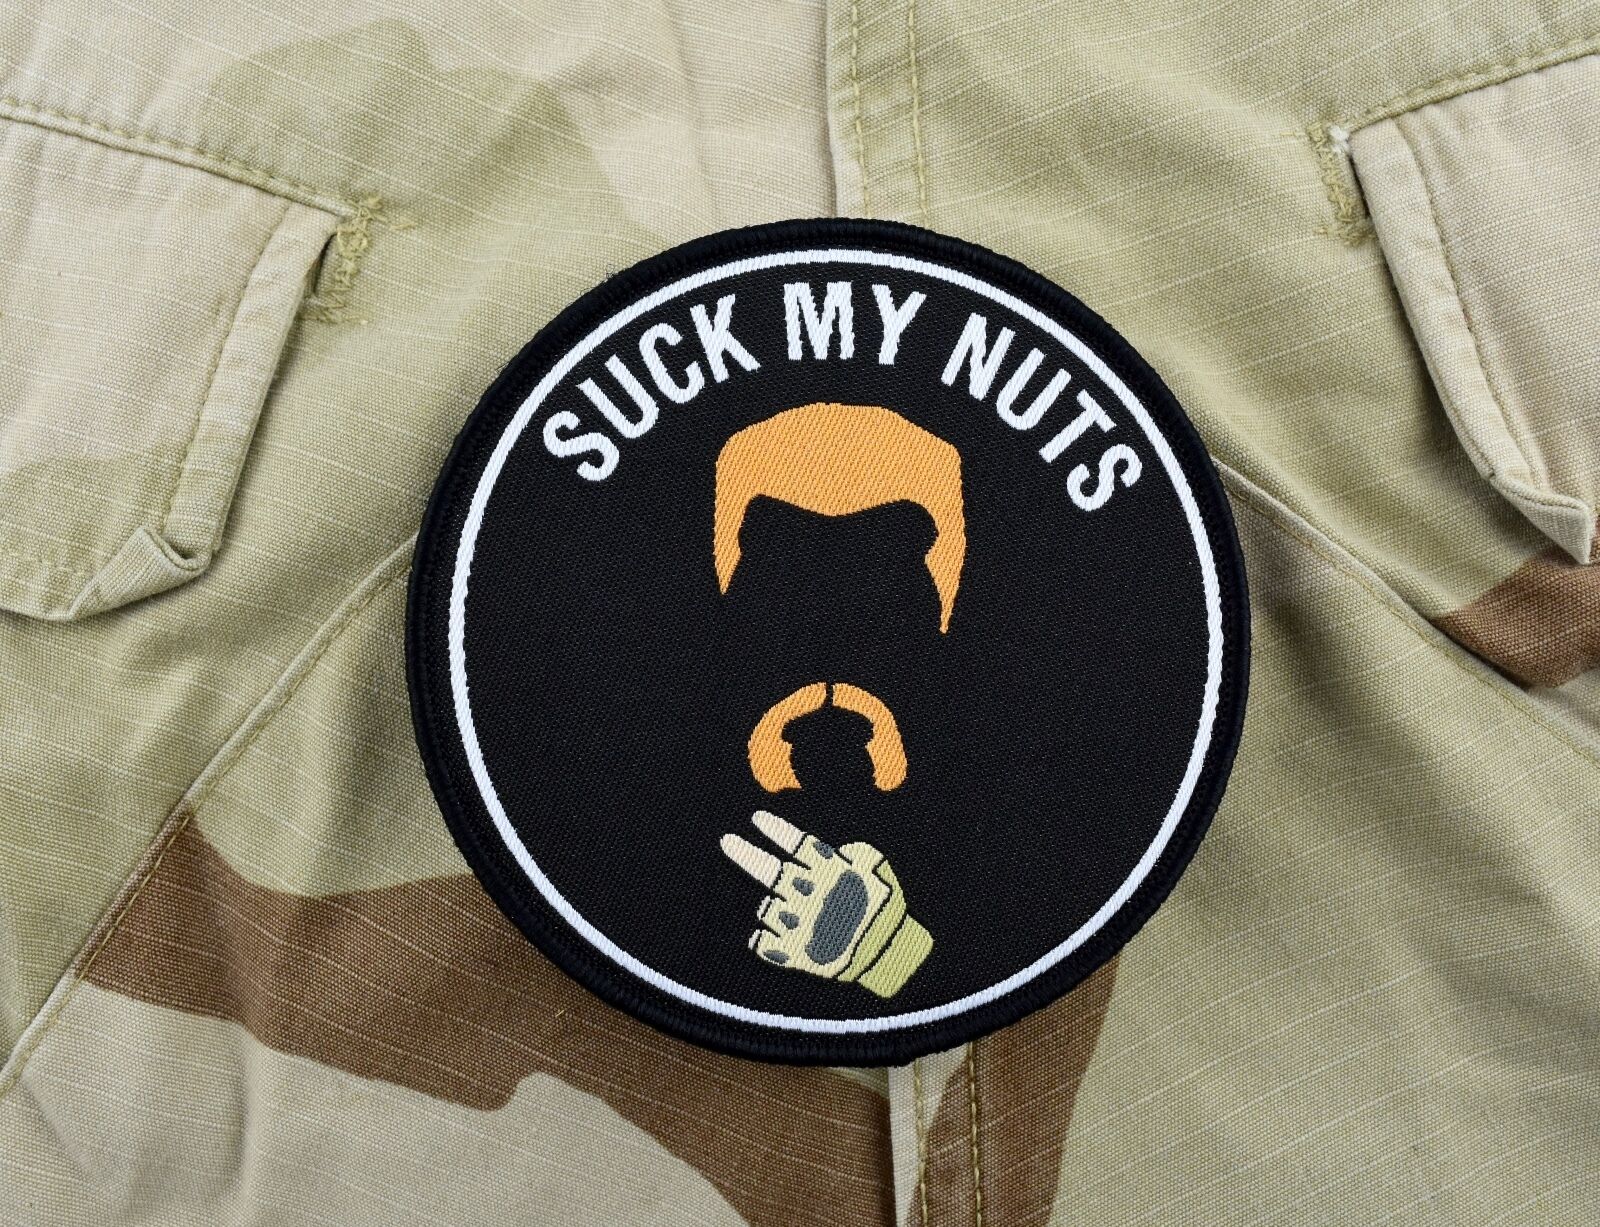 Abraham Ford SUCK MY NUTS Woven Morale Patch Walking Dead TWD Hook/Loop Backing